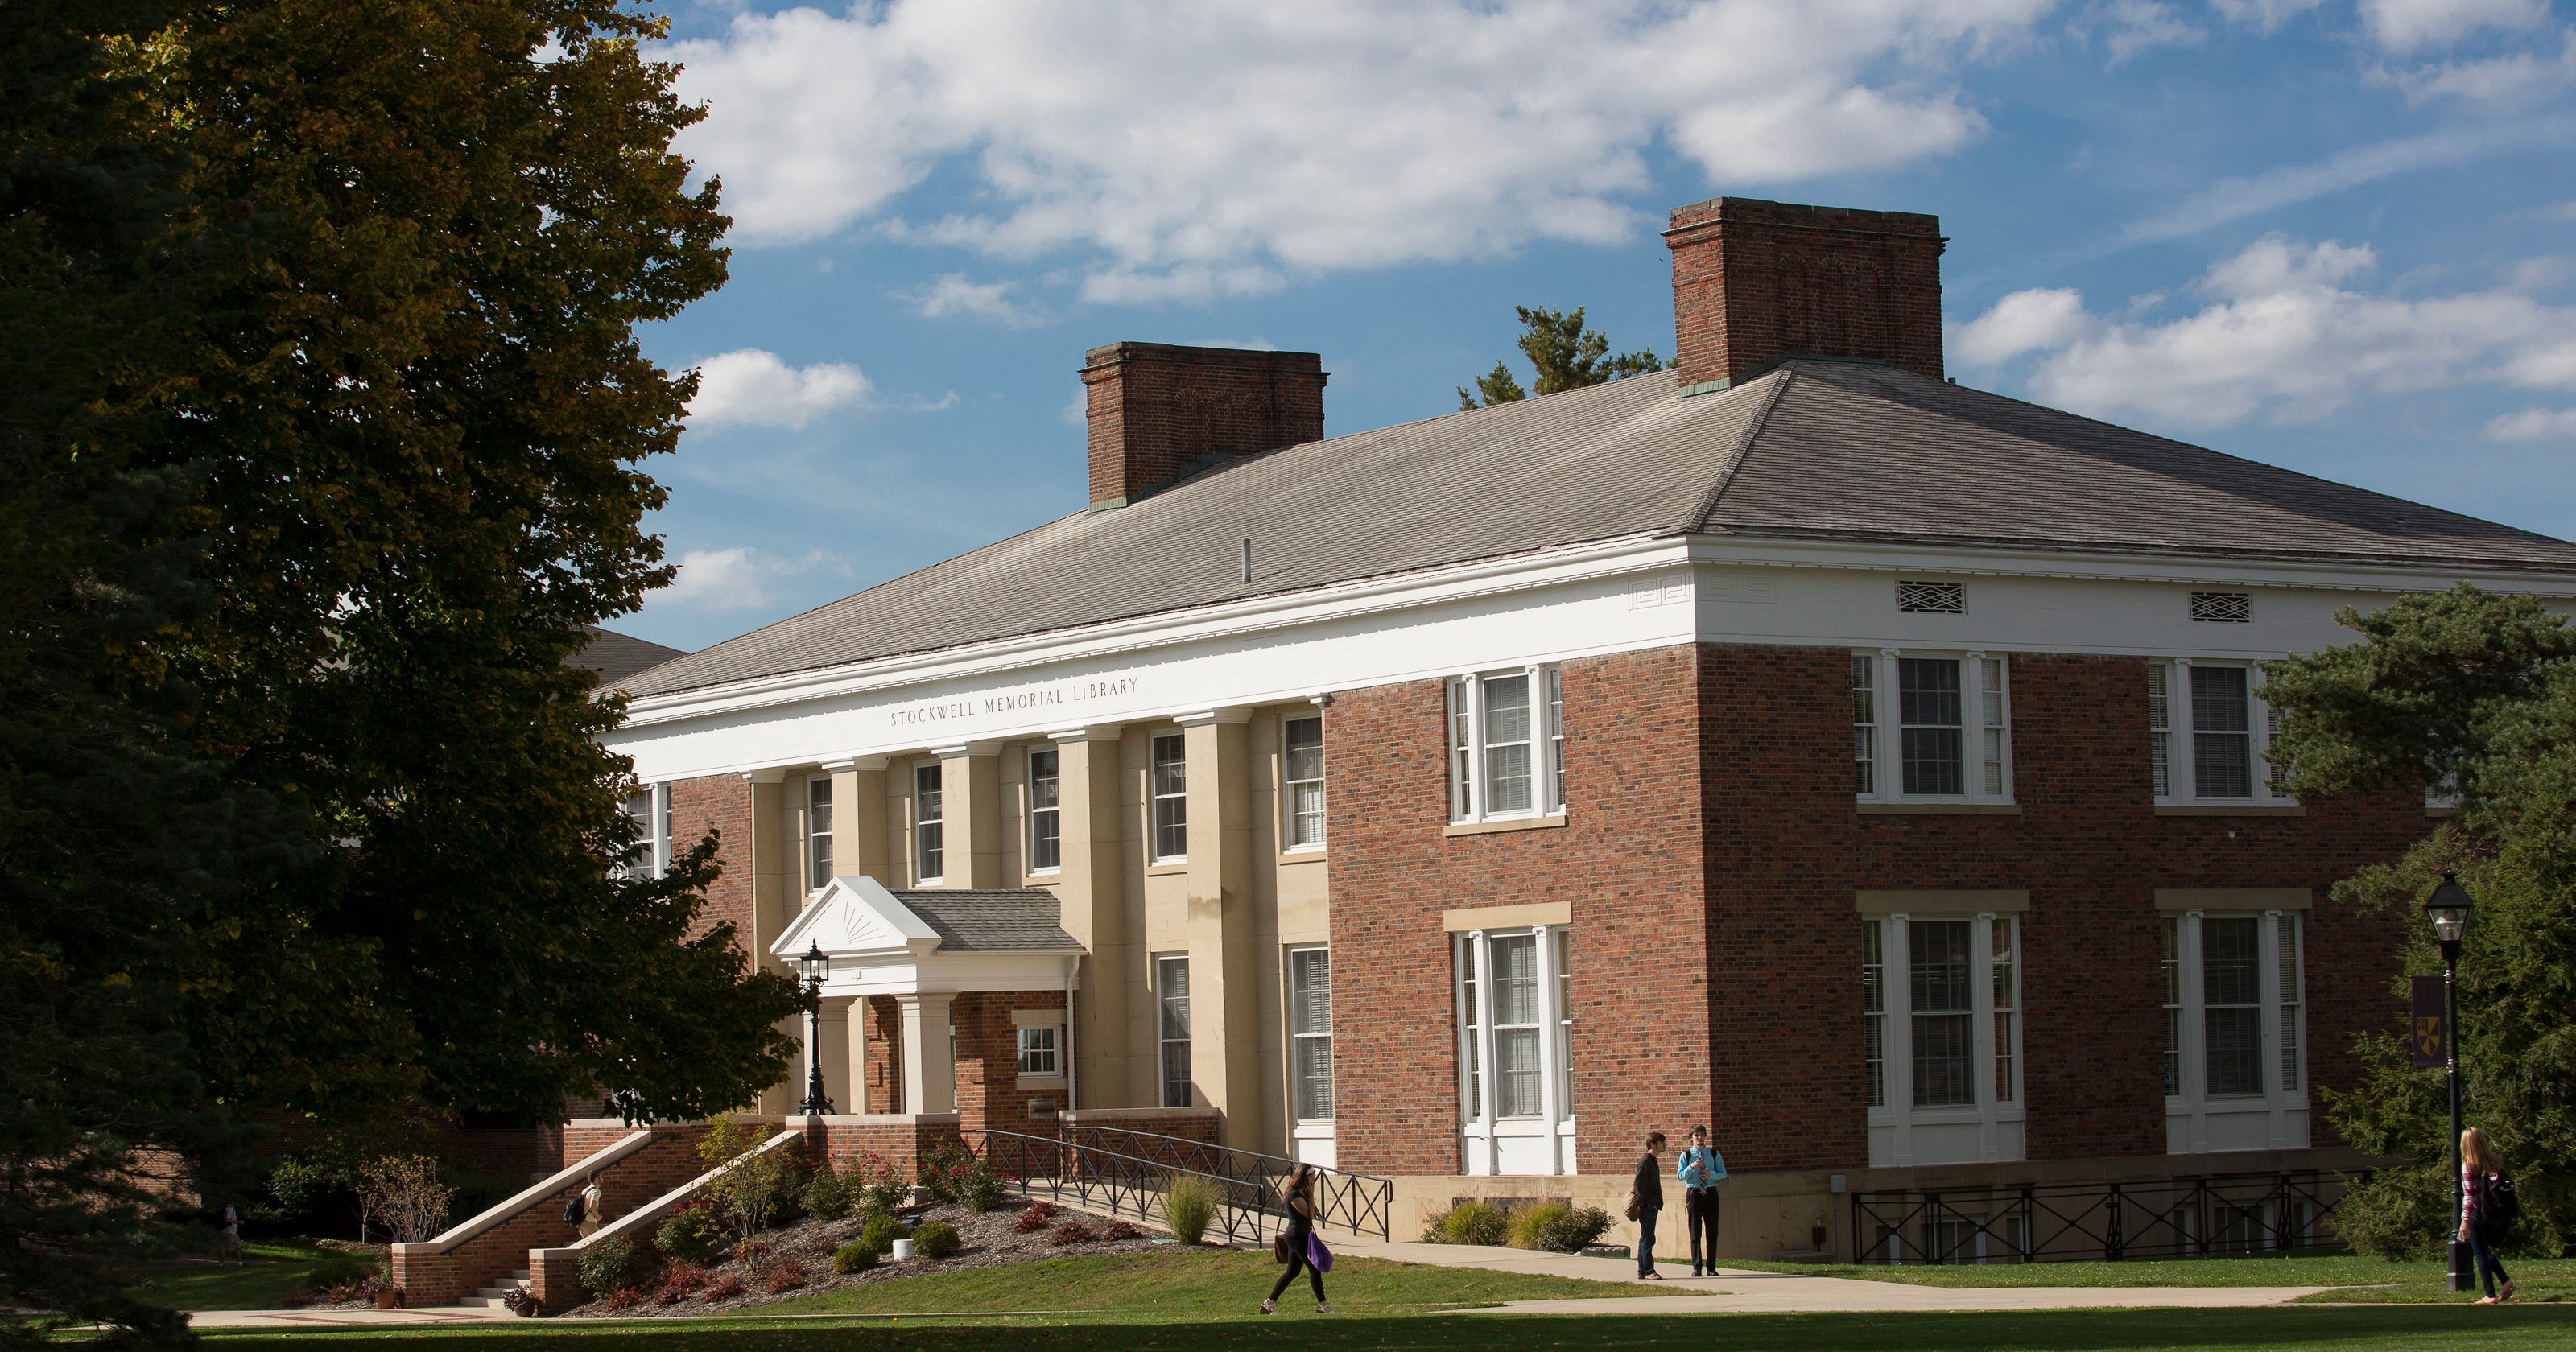 Albion College offering scholarships amid COVID19